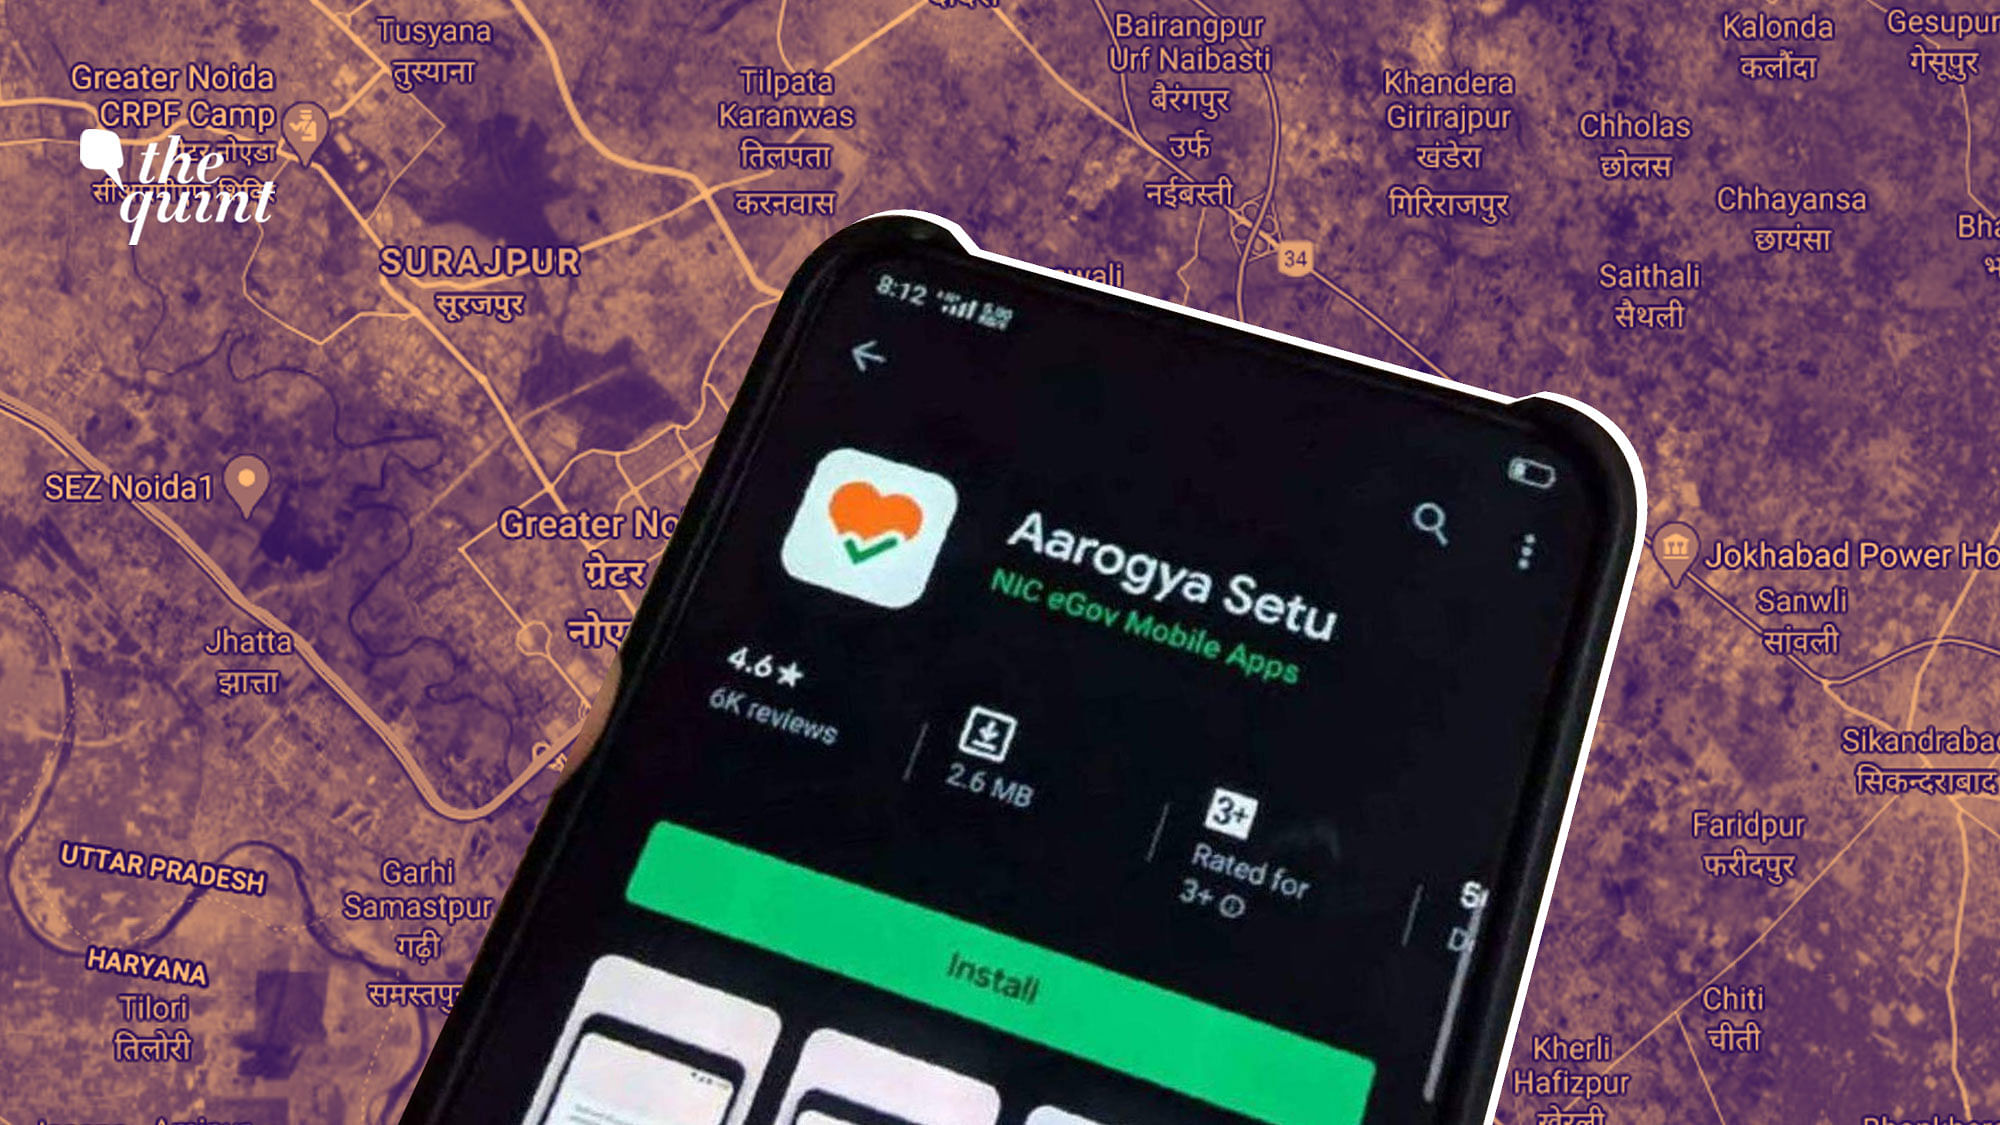 Here’s all the information you need to know about Aarogya Setu’s integration with Co-WIN app.